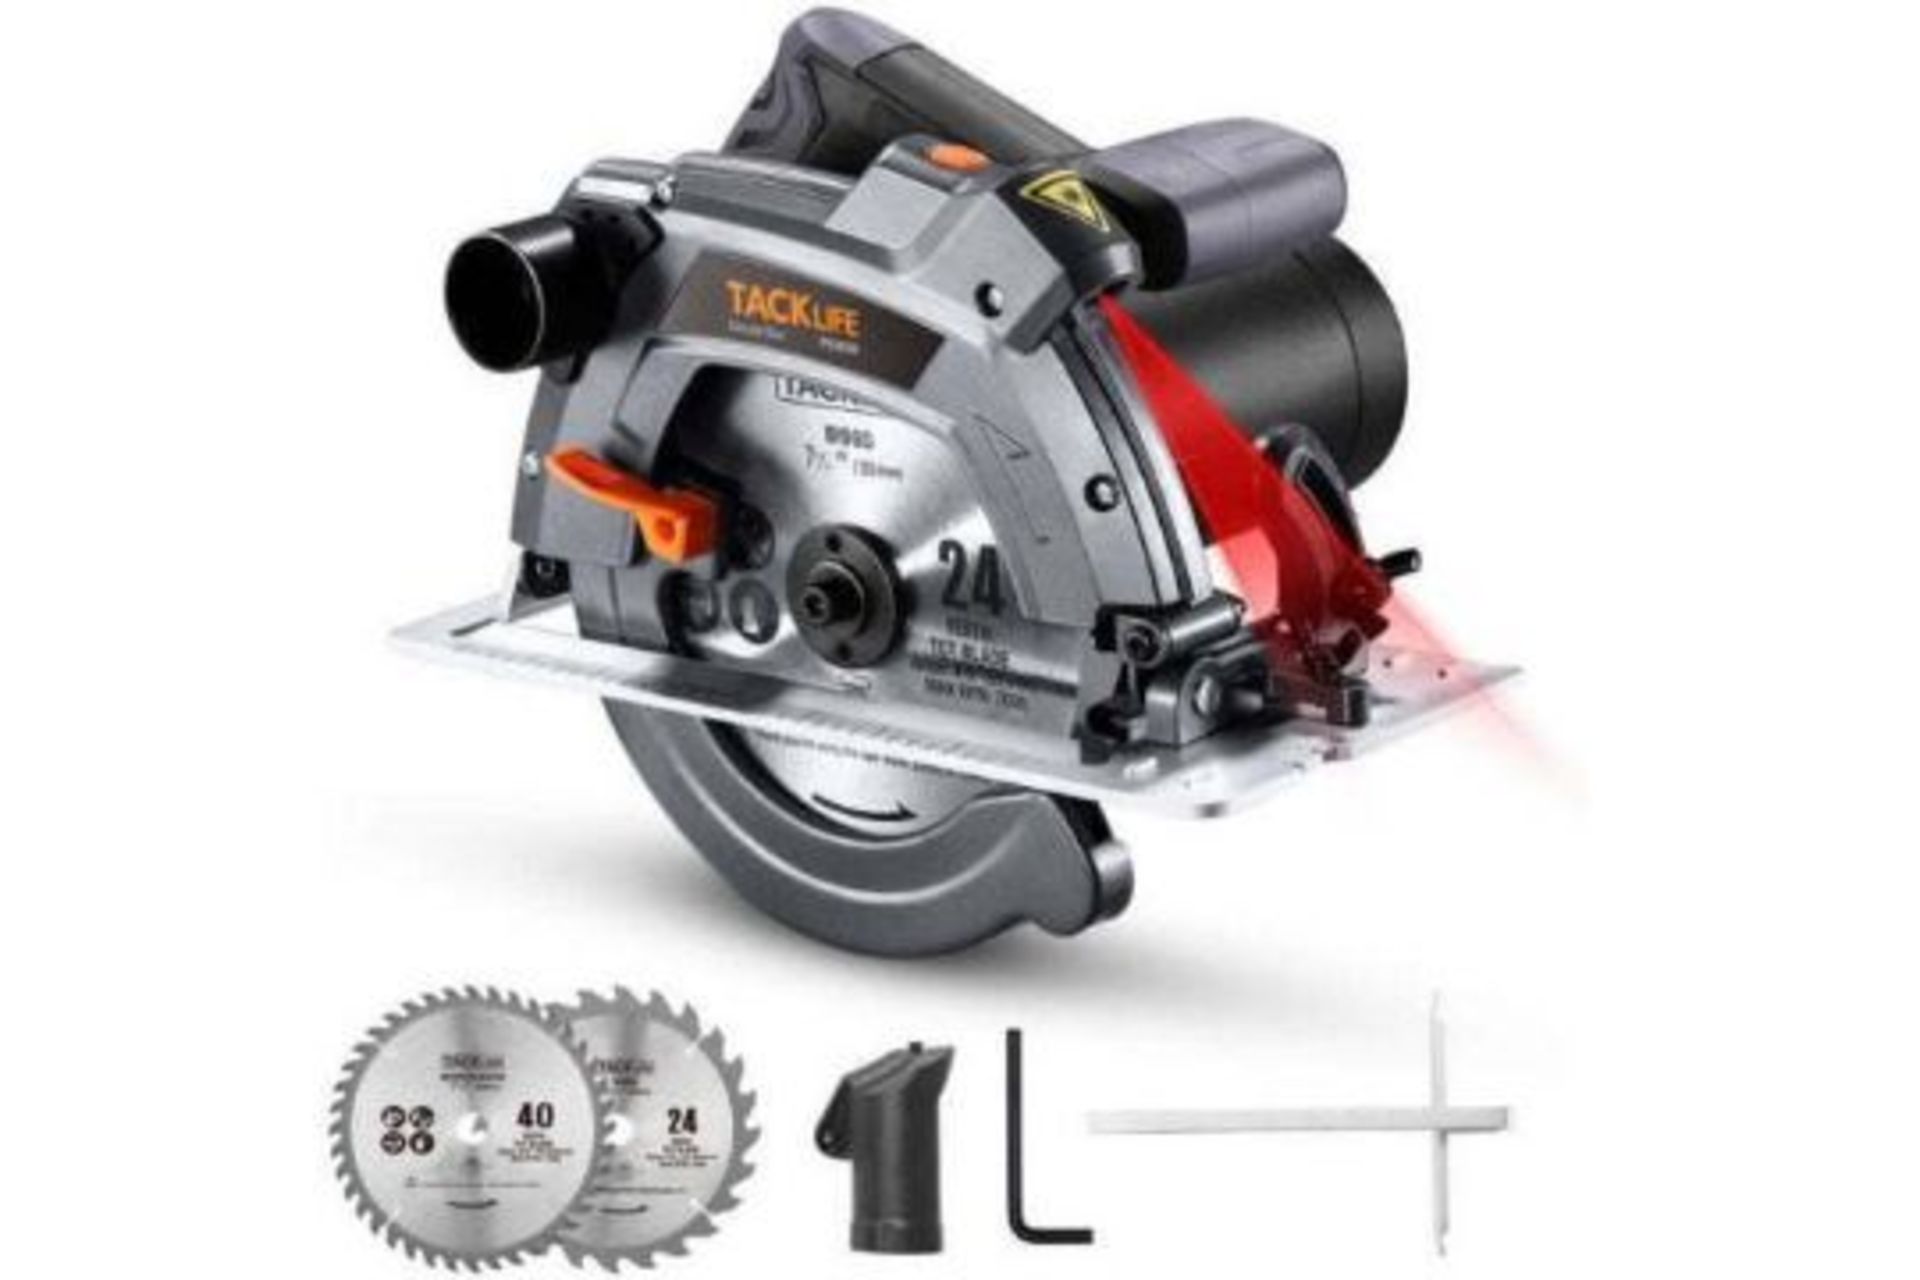 2 X NEW BOXED TACKLIFE Electric Circular Saw,1500W, 5000 RPM With Bevel Cuts 2-3/5''. (ROW 12)